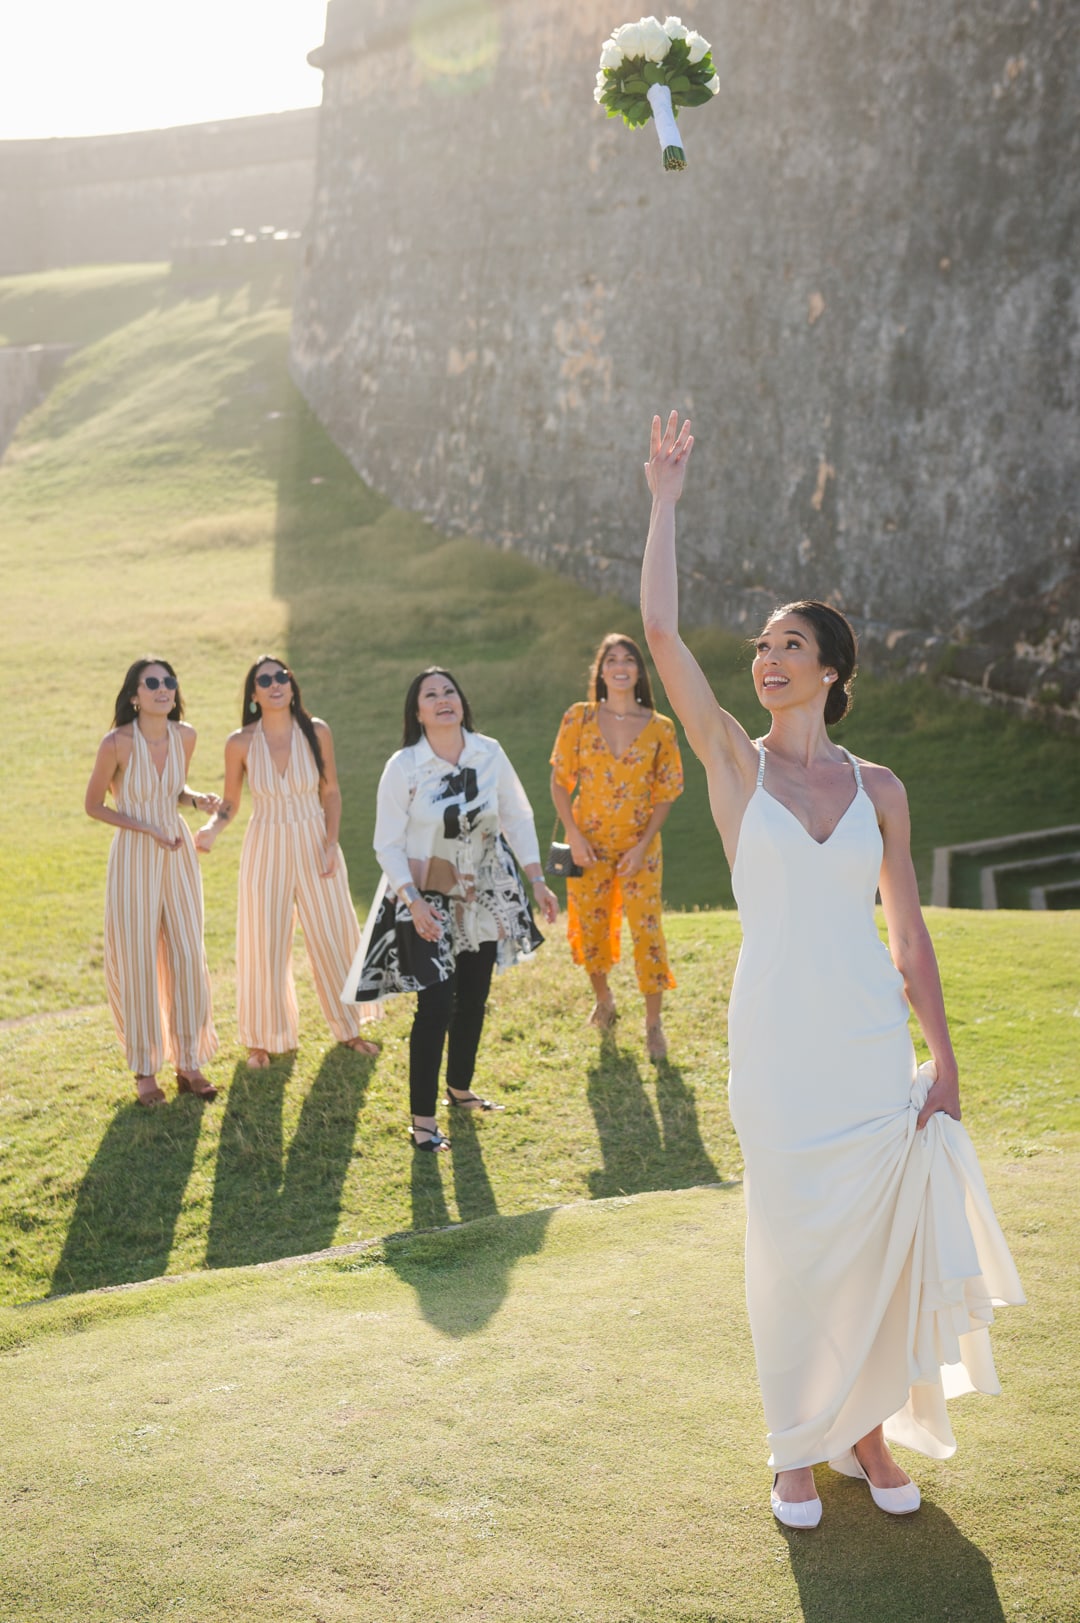 Small intimate elopement at El Morro by Puerto Rico wedding photographer Camille Fontanez